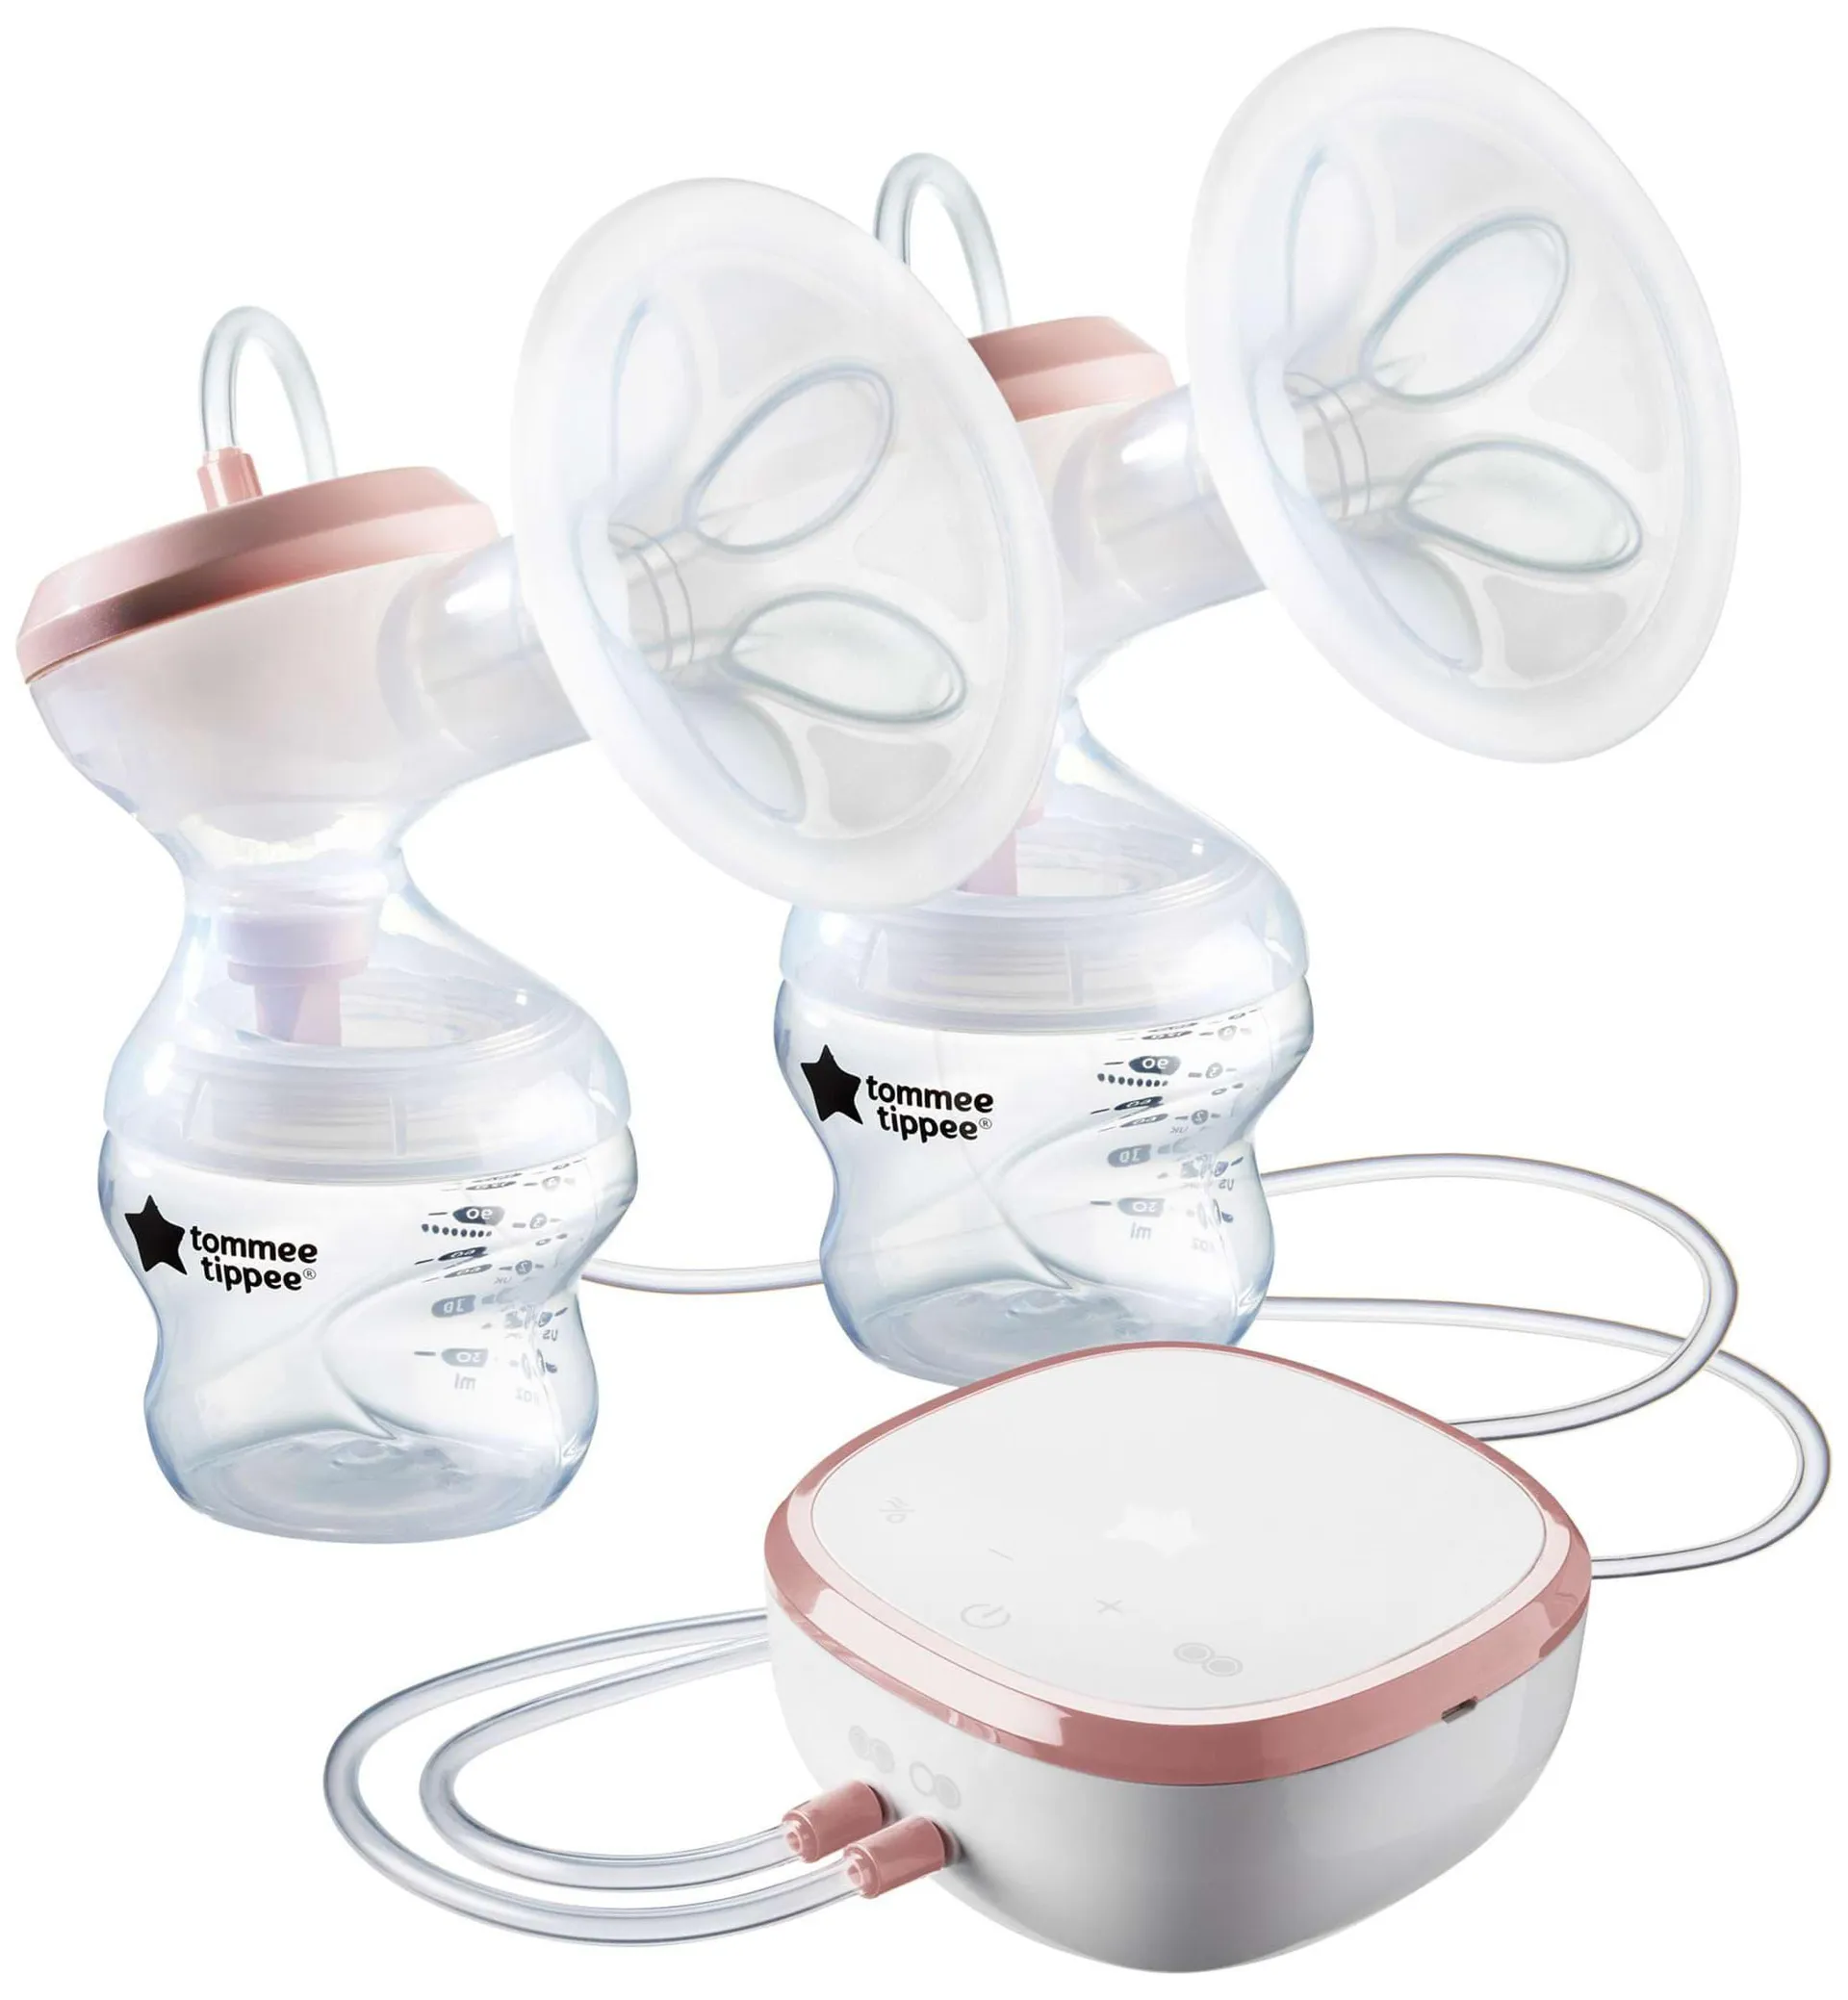 Tommee Tippee Made for Me Double Electric Breast Pump in White